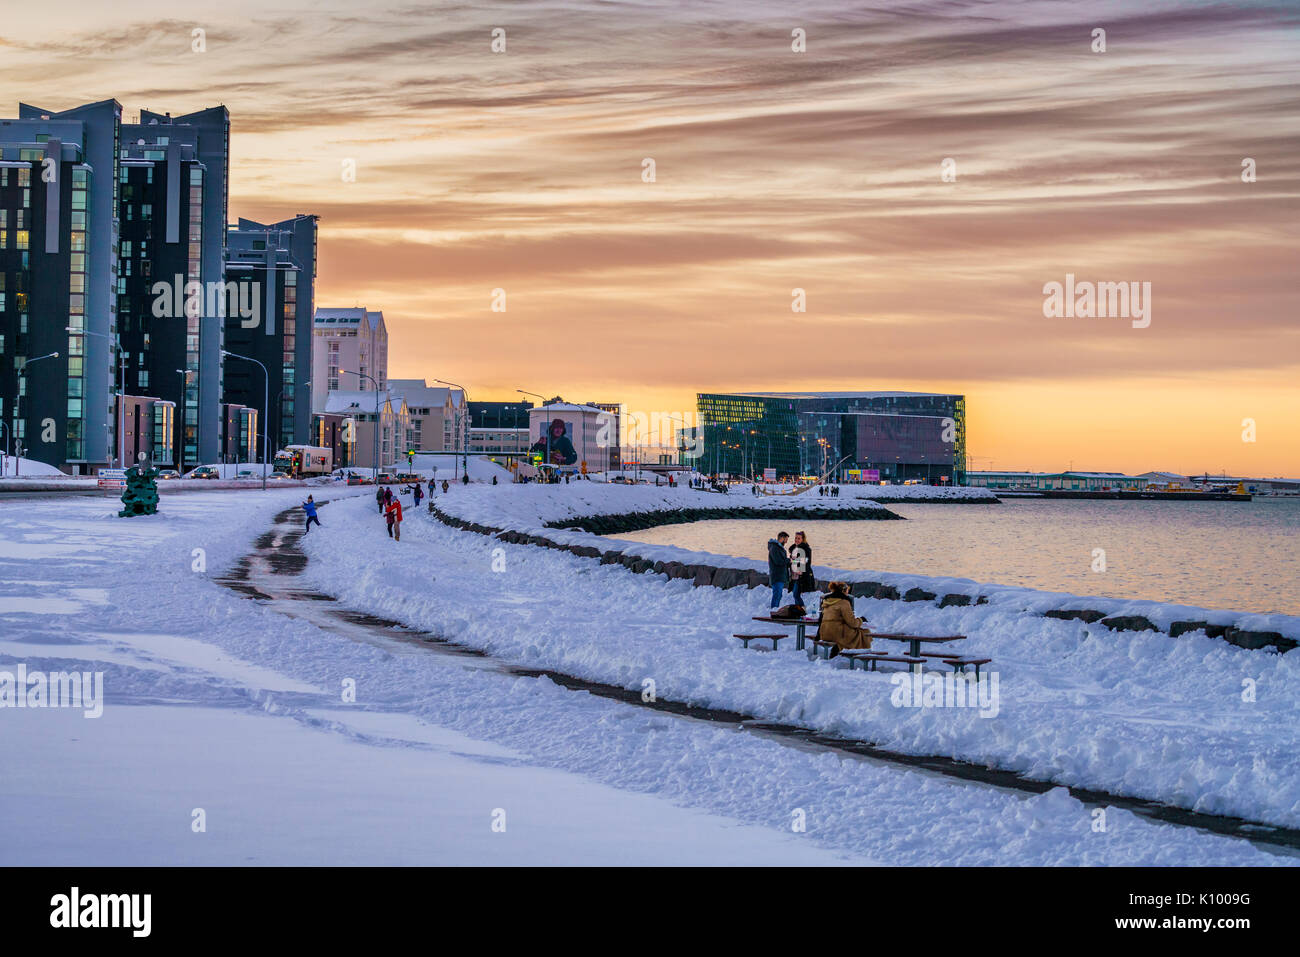 Walking path along the sea in the wintertime, Harpa in the backgrounsd Reykjavik, Iceland Stock Photo